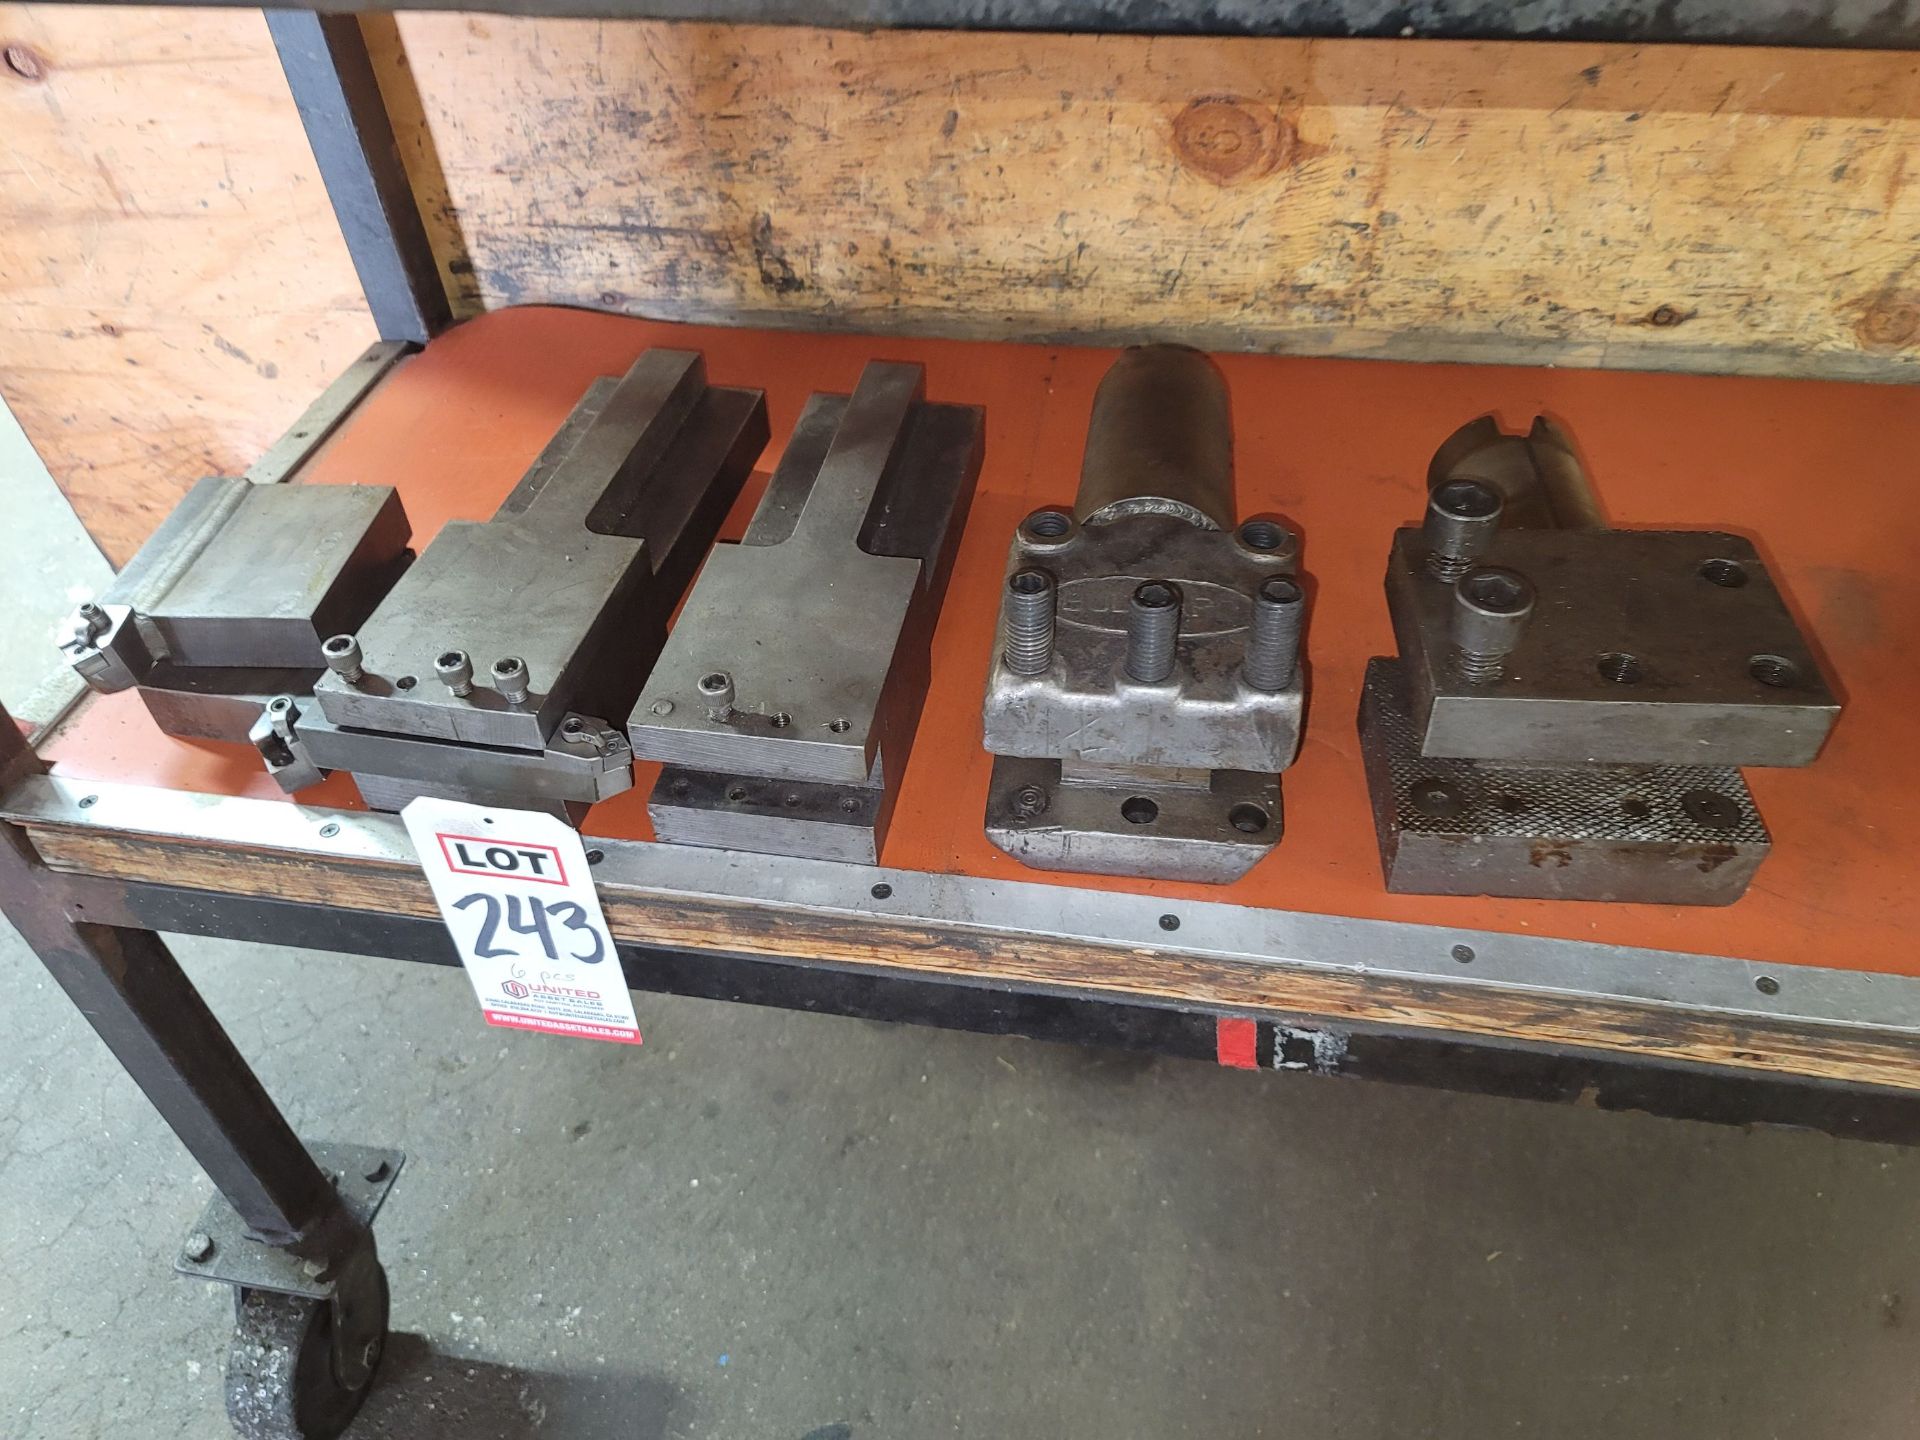 LOT - (2) INSERT CUTTING TOOLS AND (4) TOOL HOLDERS FOR THE VERTICAL TURRET LATHES